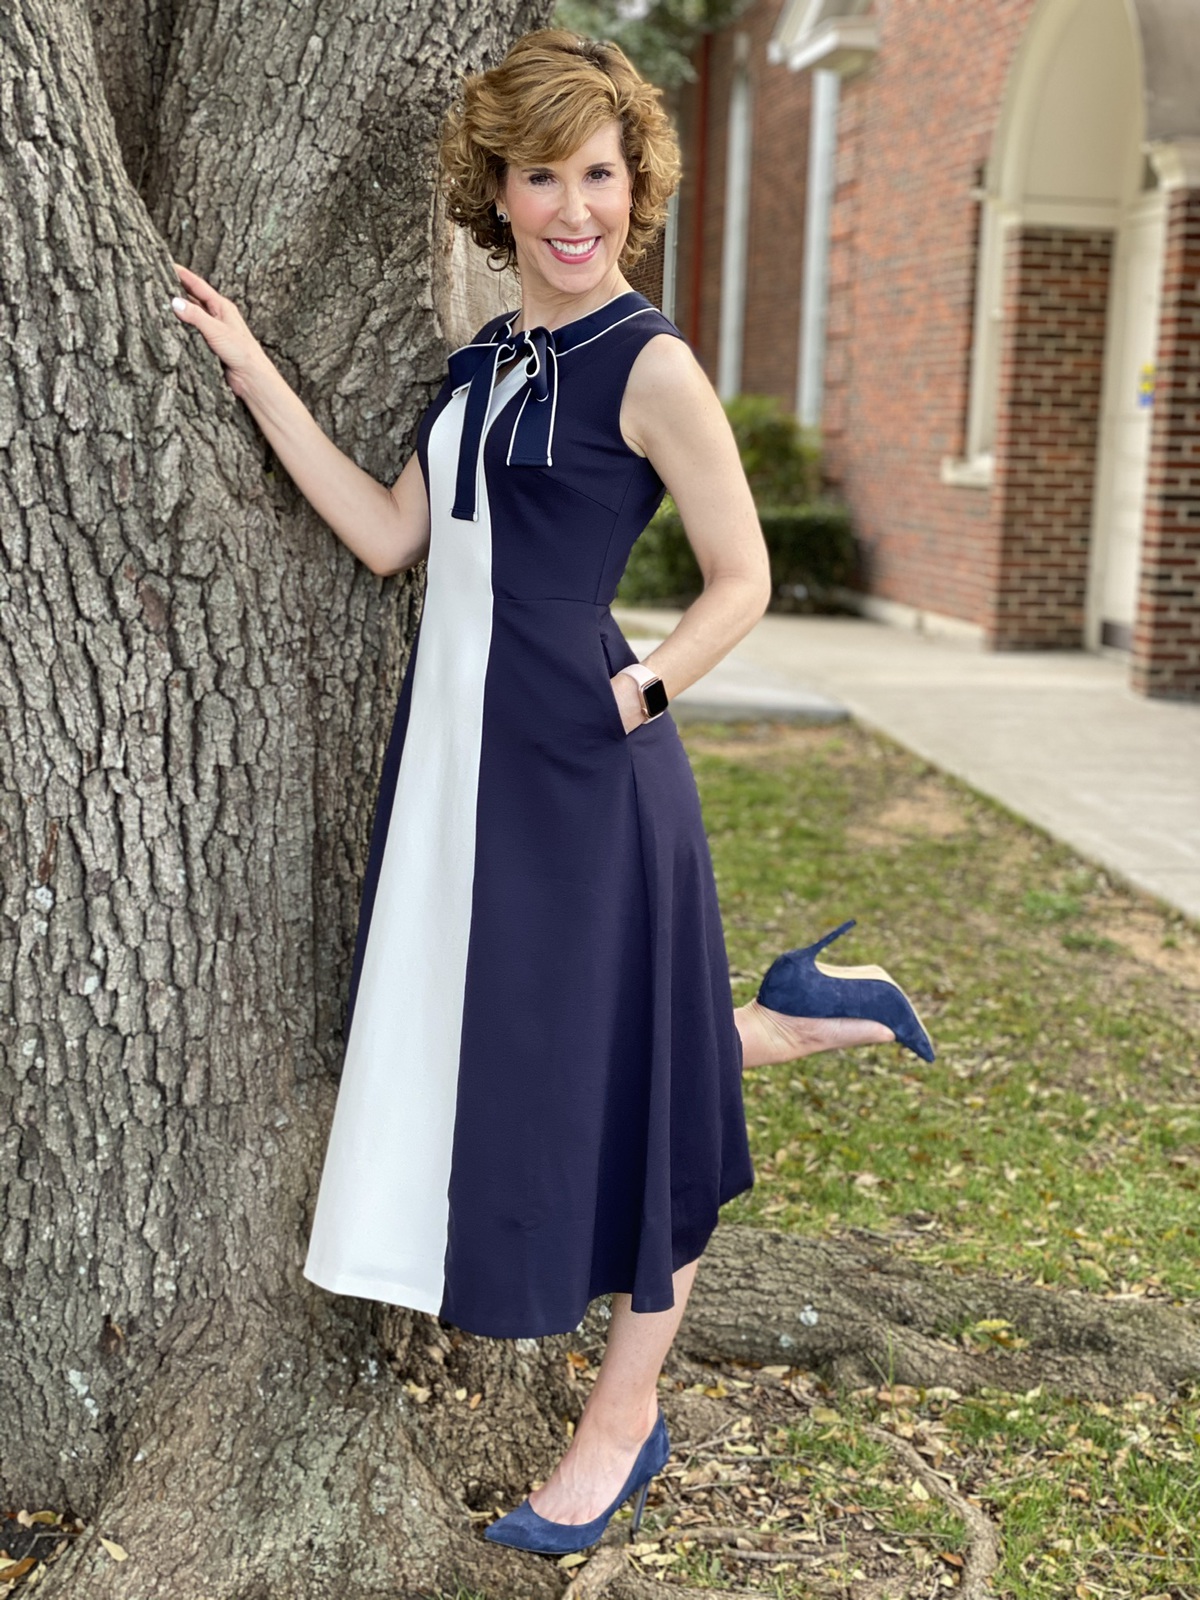 woman over 50 wearing navy and cream dress standing by a tree